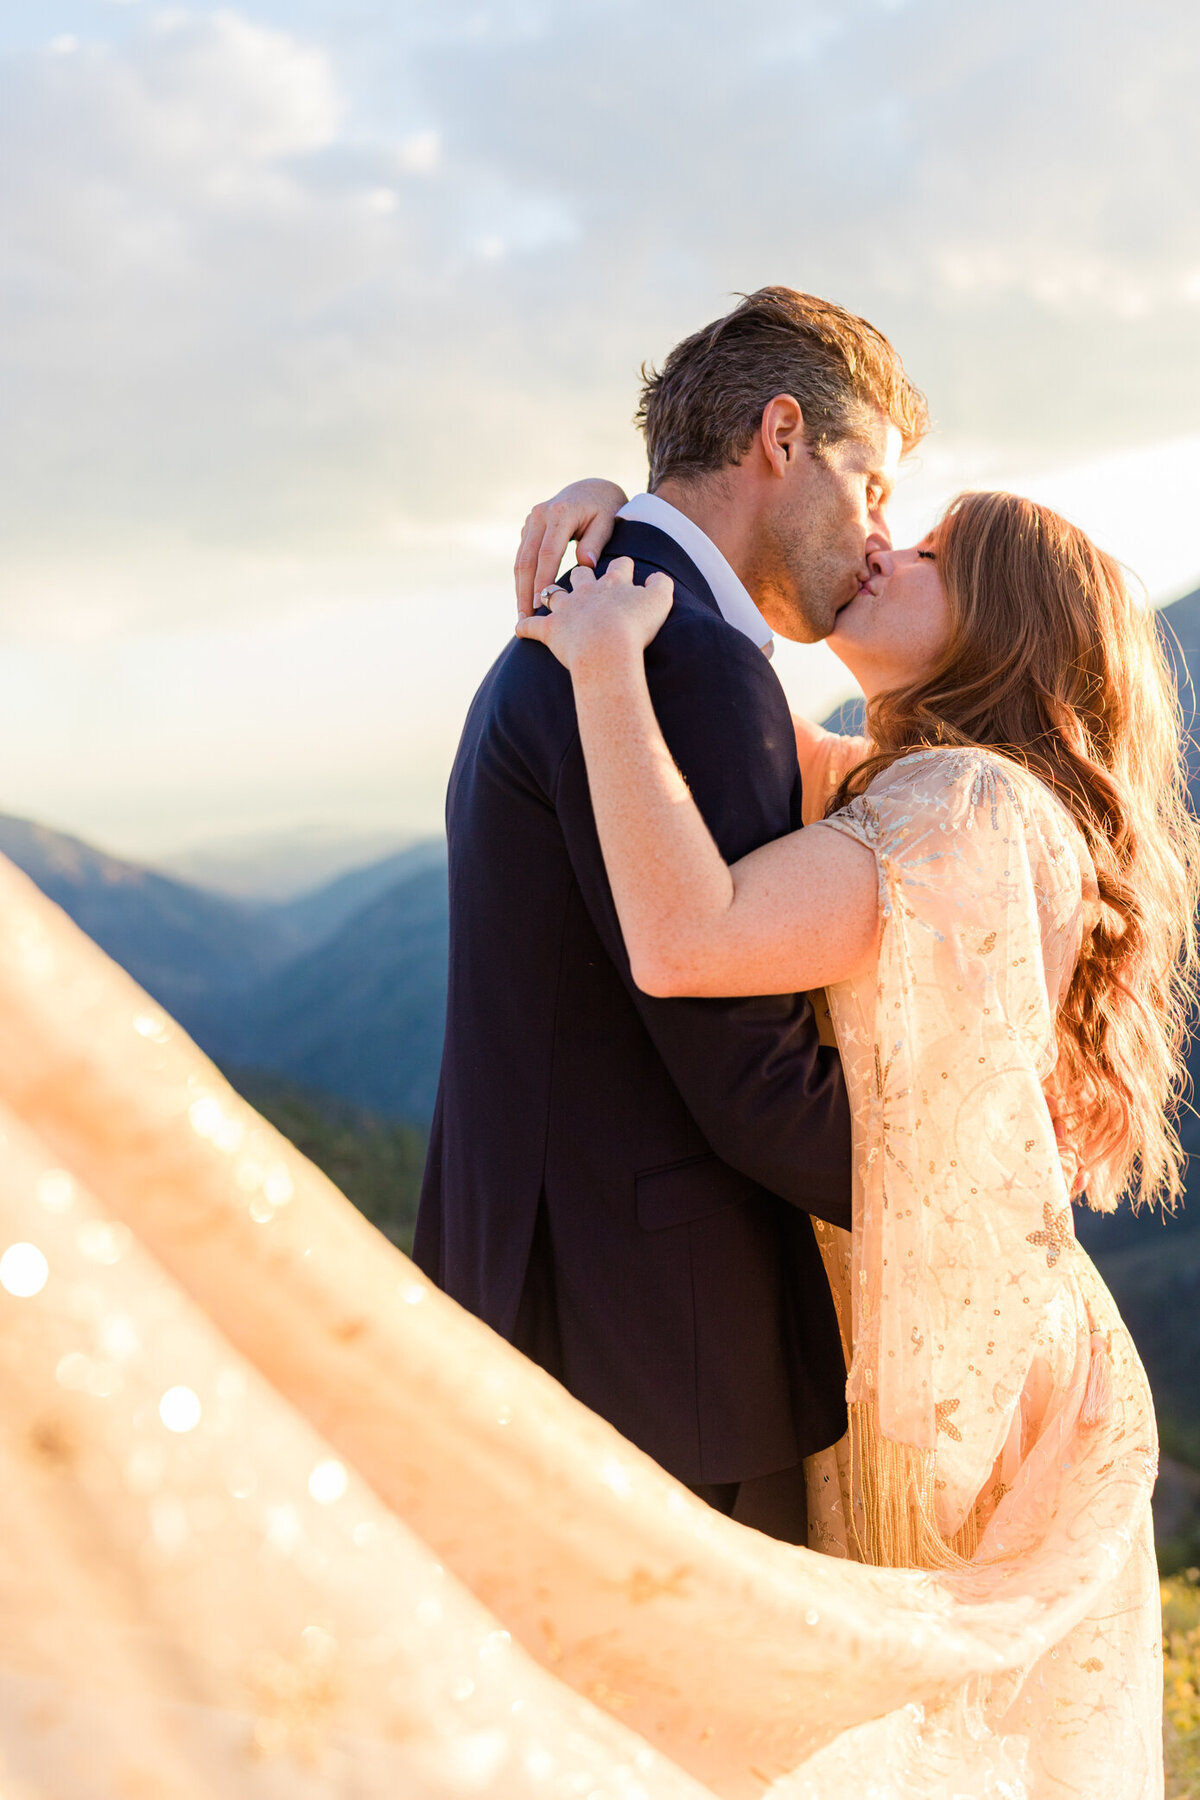 Wrightwood Elopement, Mountain Elopement, Forest Elopement, Wrightwood Elopement Photographer, Elopement Photographer, Wrightwood Photographer E&N-45